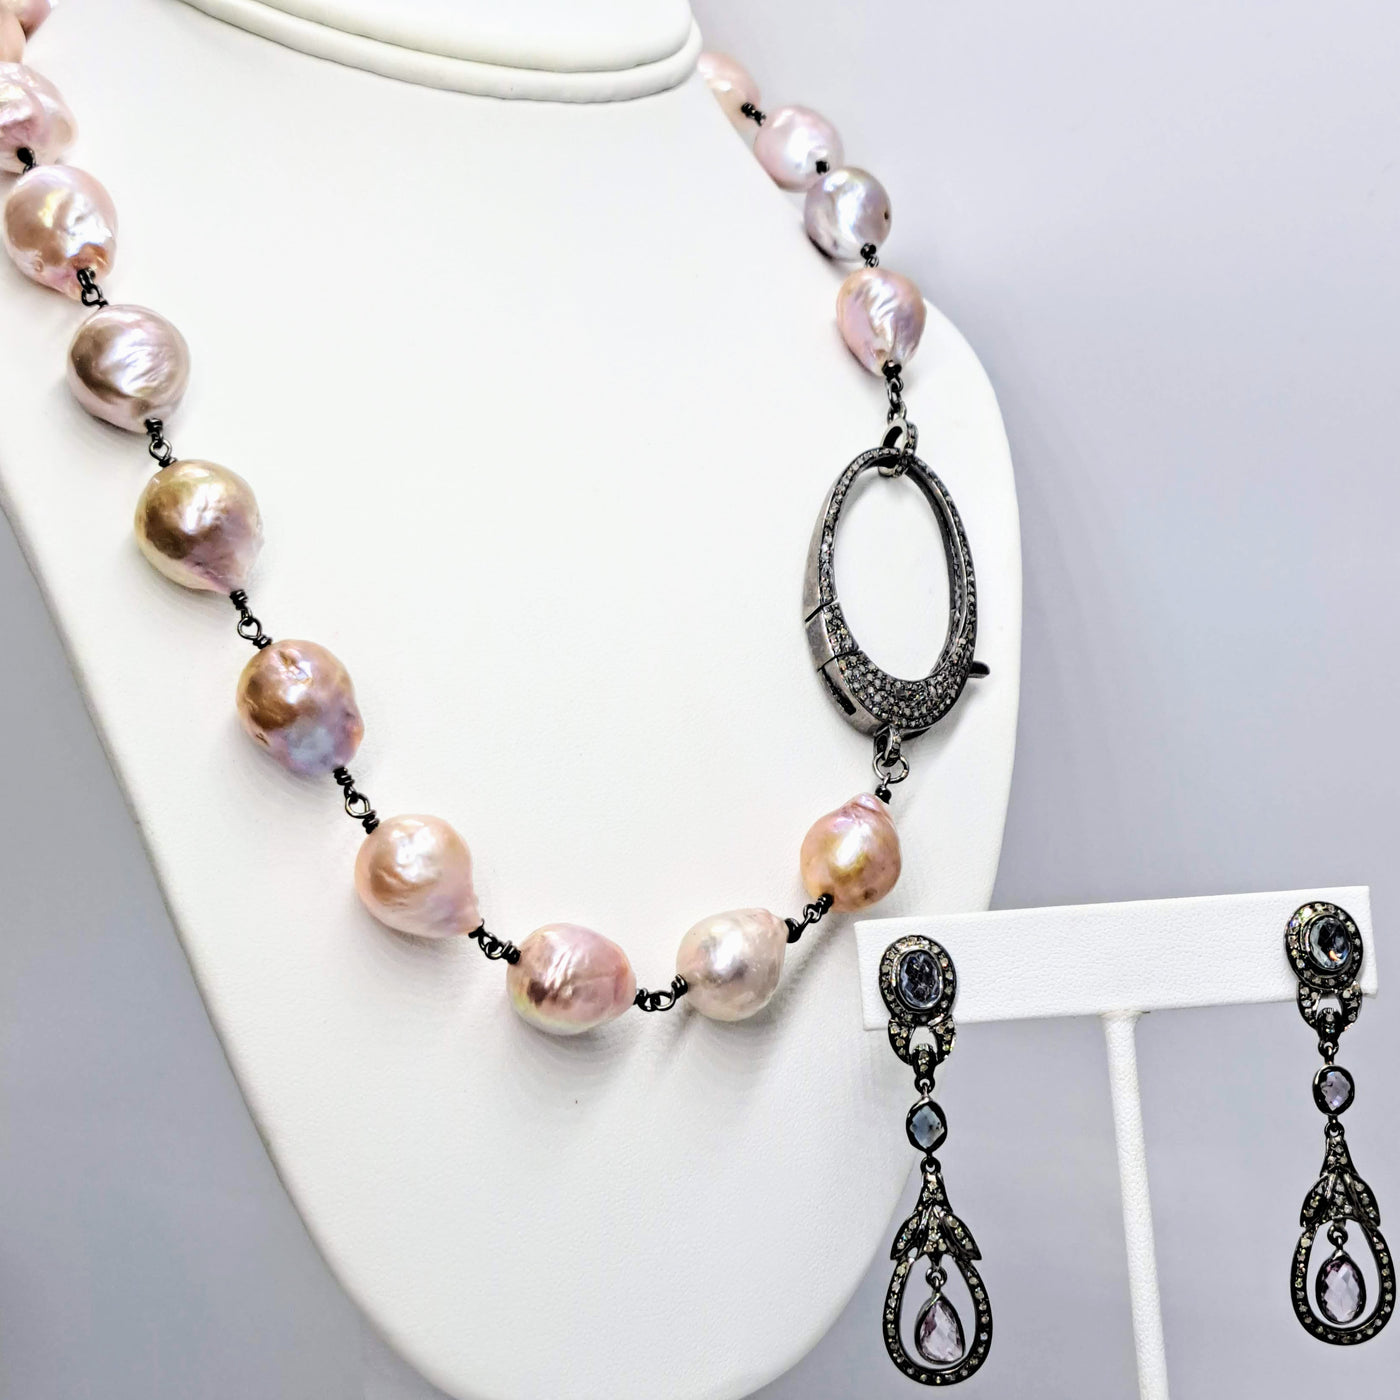 "Rock N Roll Pearls" 20" Necklace - Baroque Edison Pearls, Diamonds, Oxidized Sterling